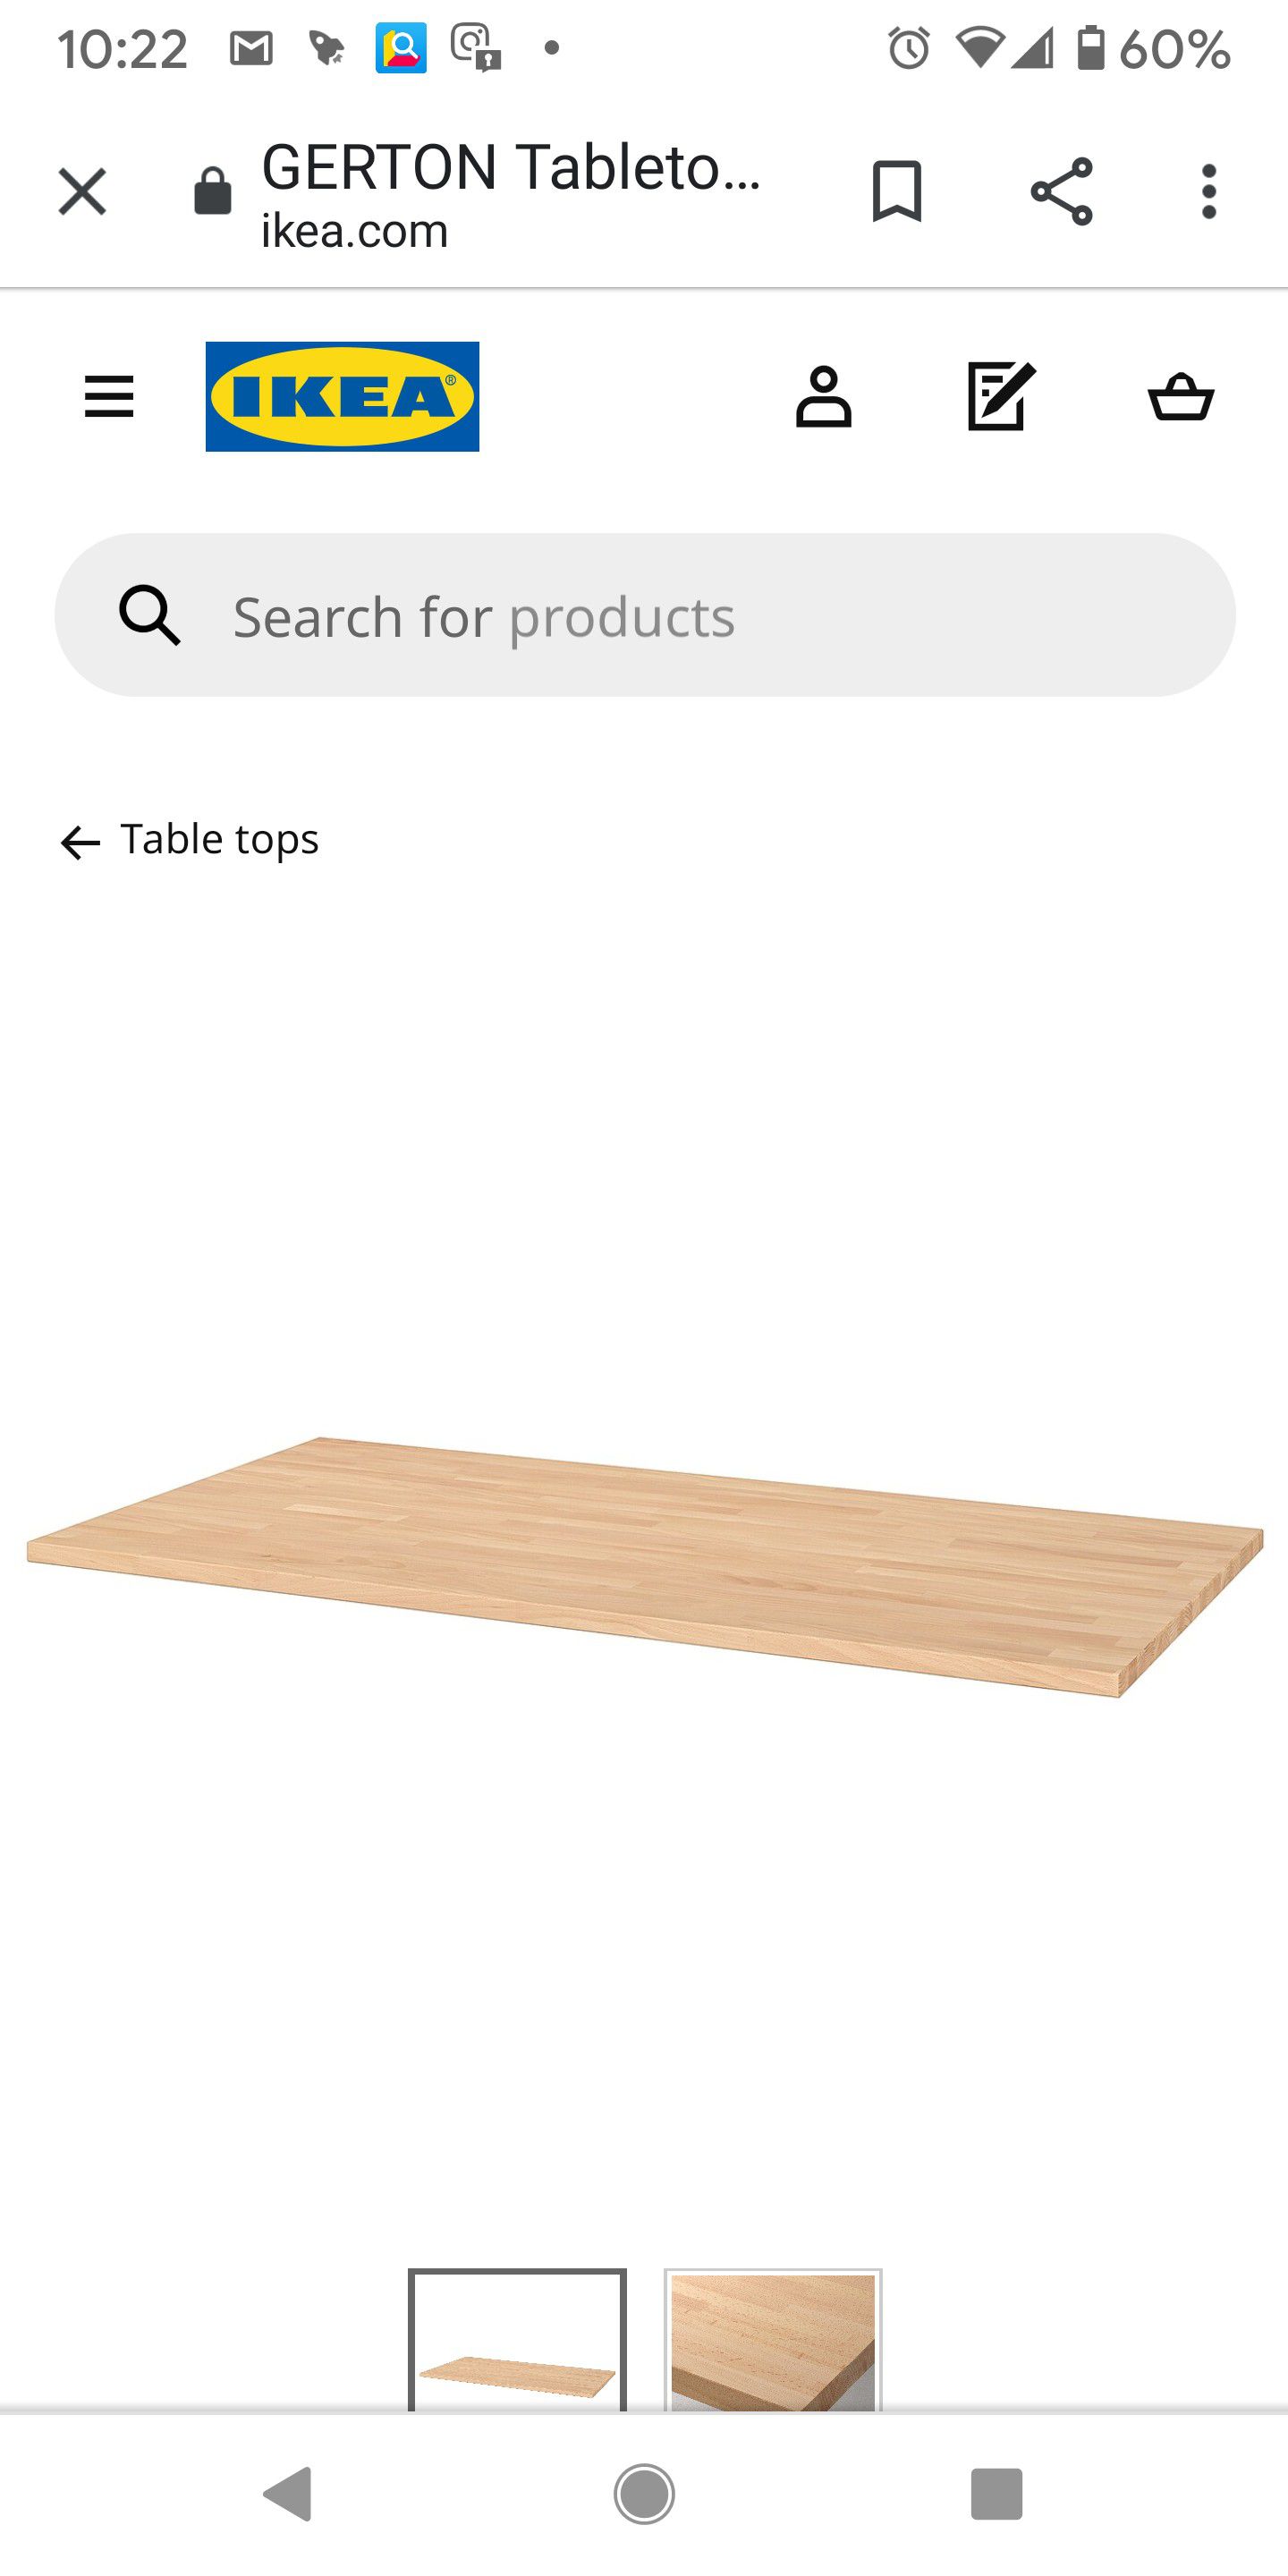 Ikea Gerton Wood Tabletop with 4 legs